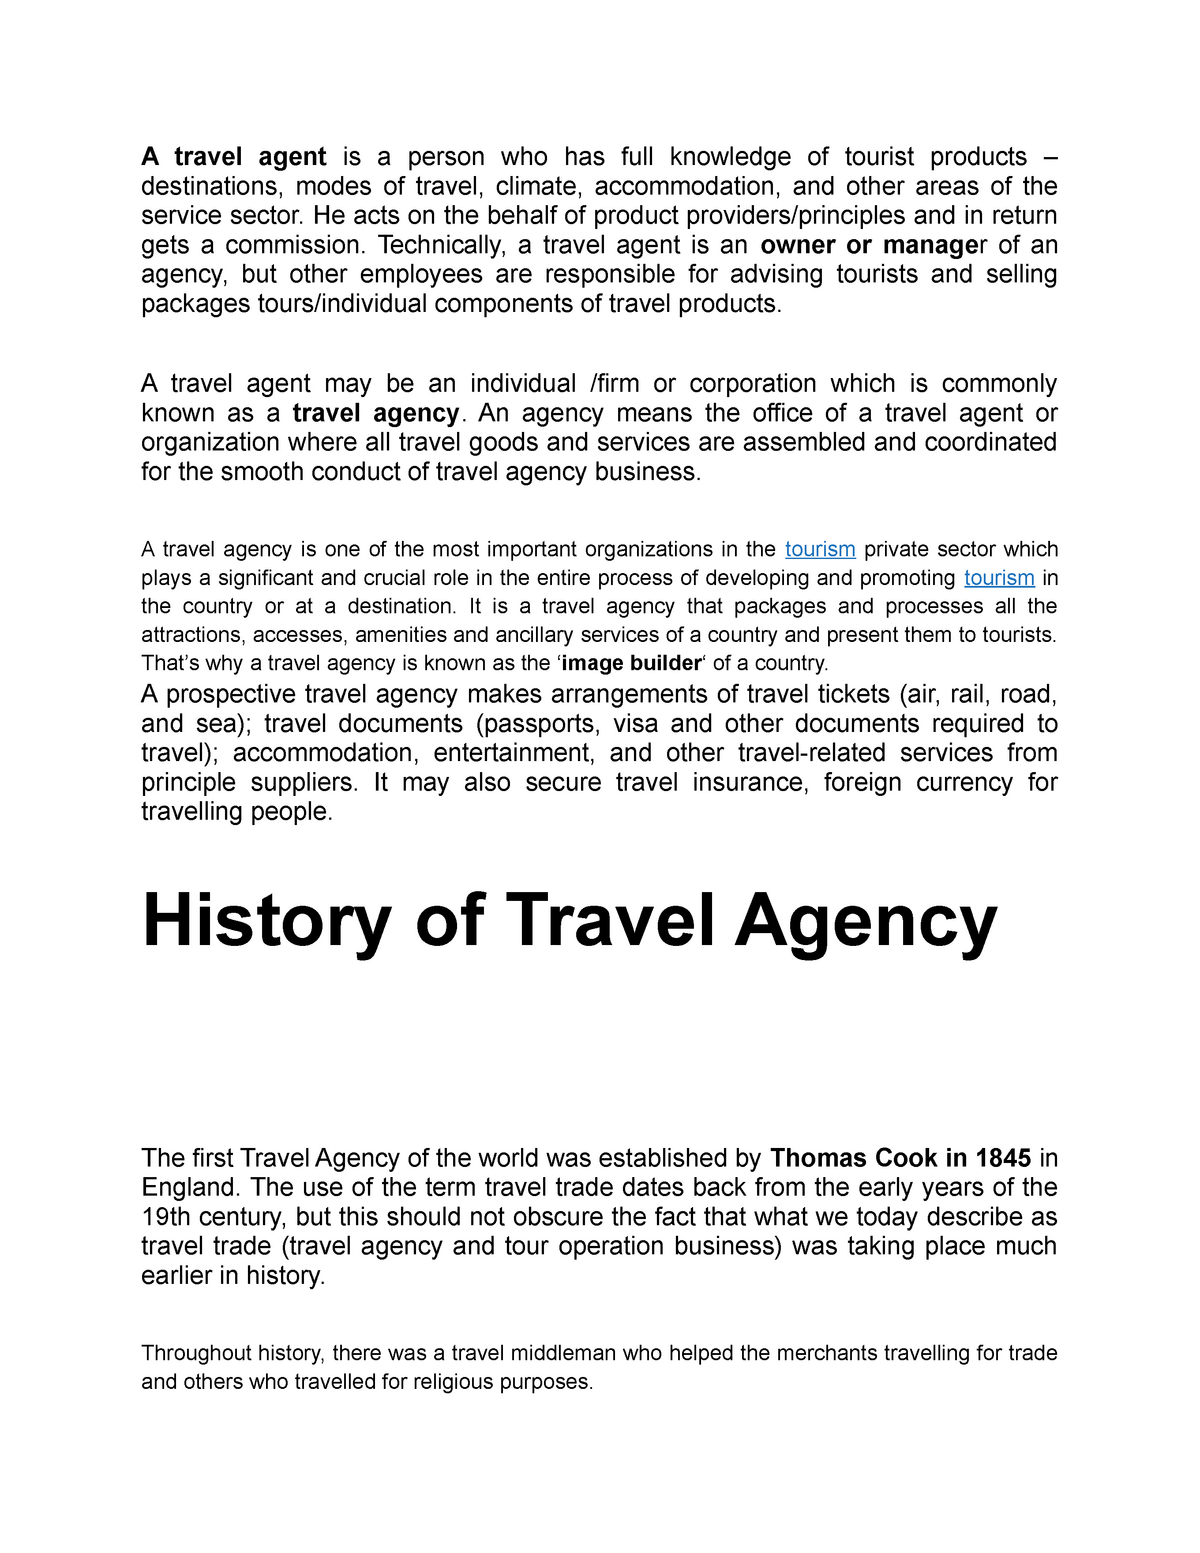 research topics about travel agency